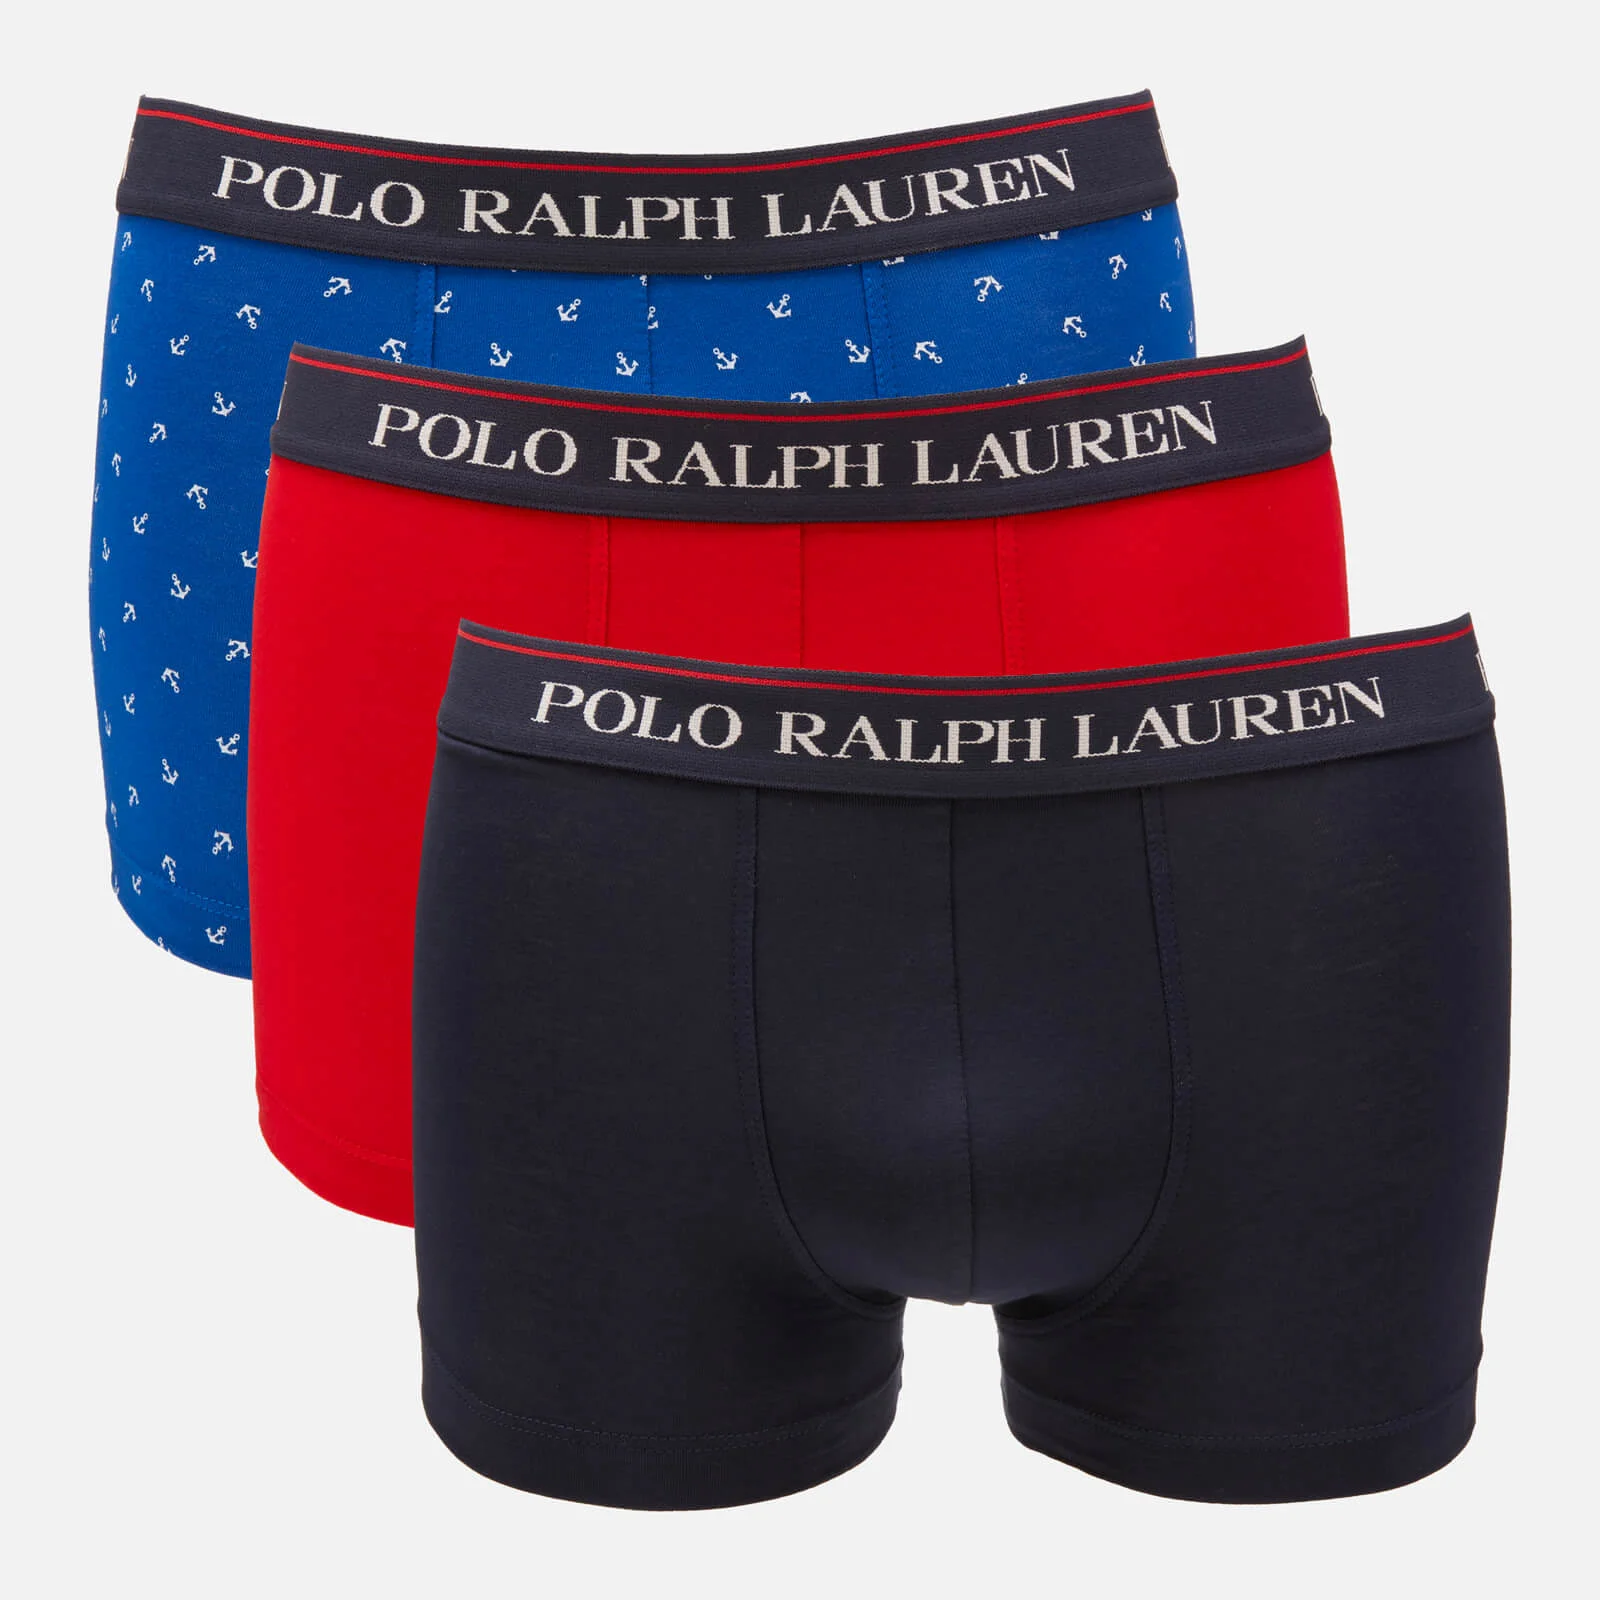 Polo Ralph Lauren Men's 3 Pack Classic Trunk Boxer Shorts - Cruise Navy/Red/Sapphire Star Image 1